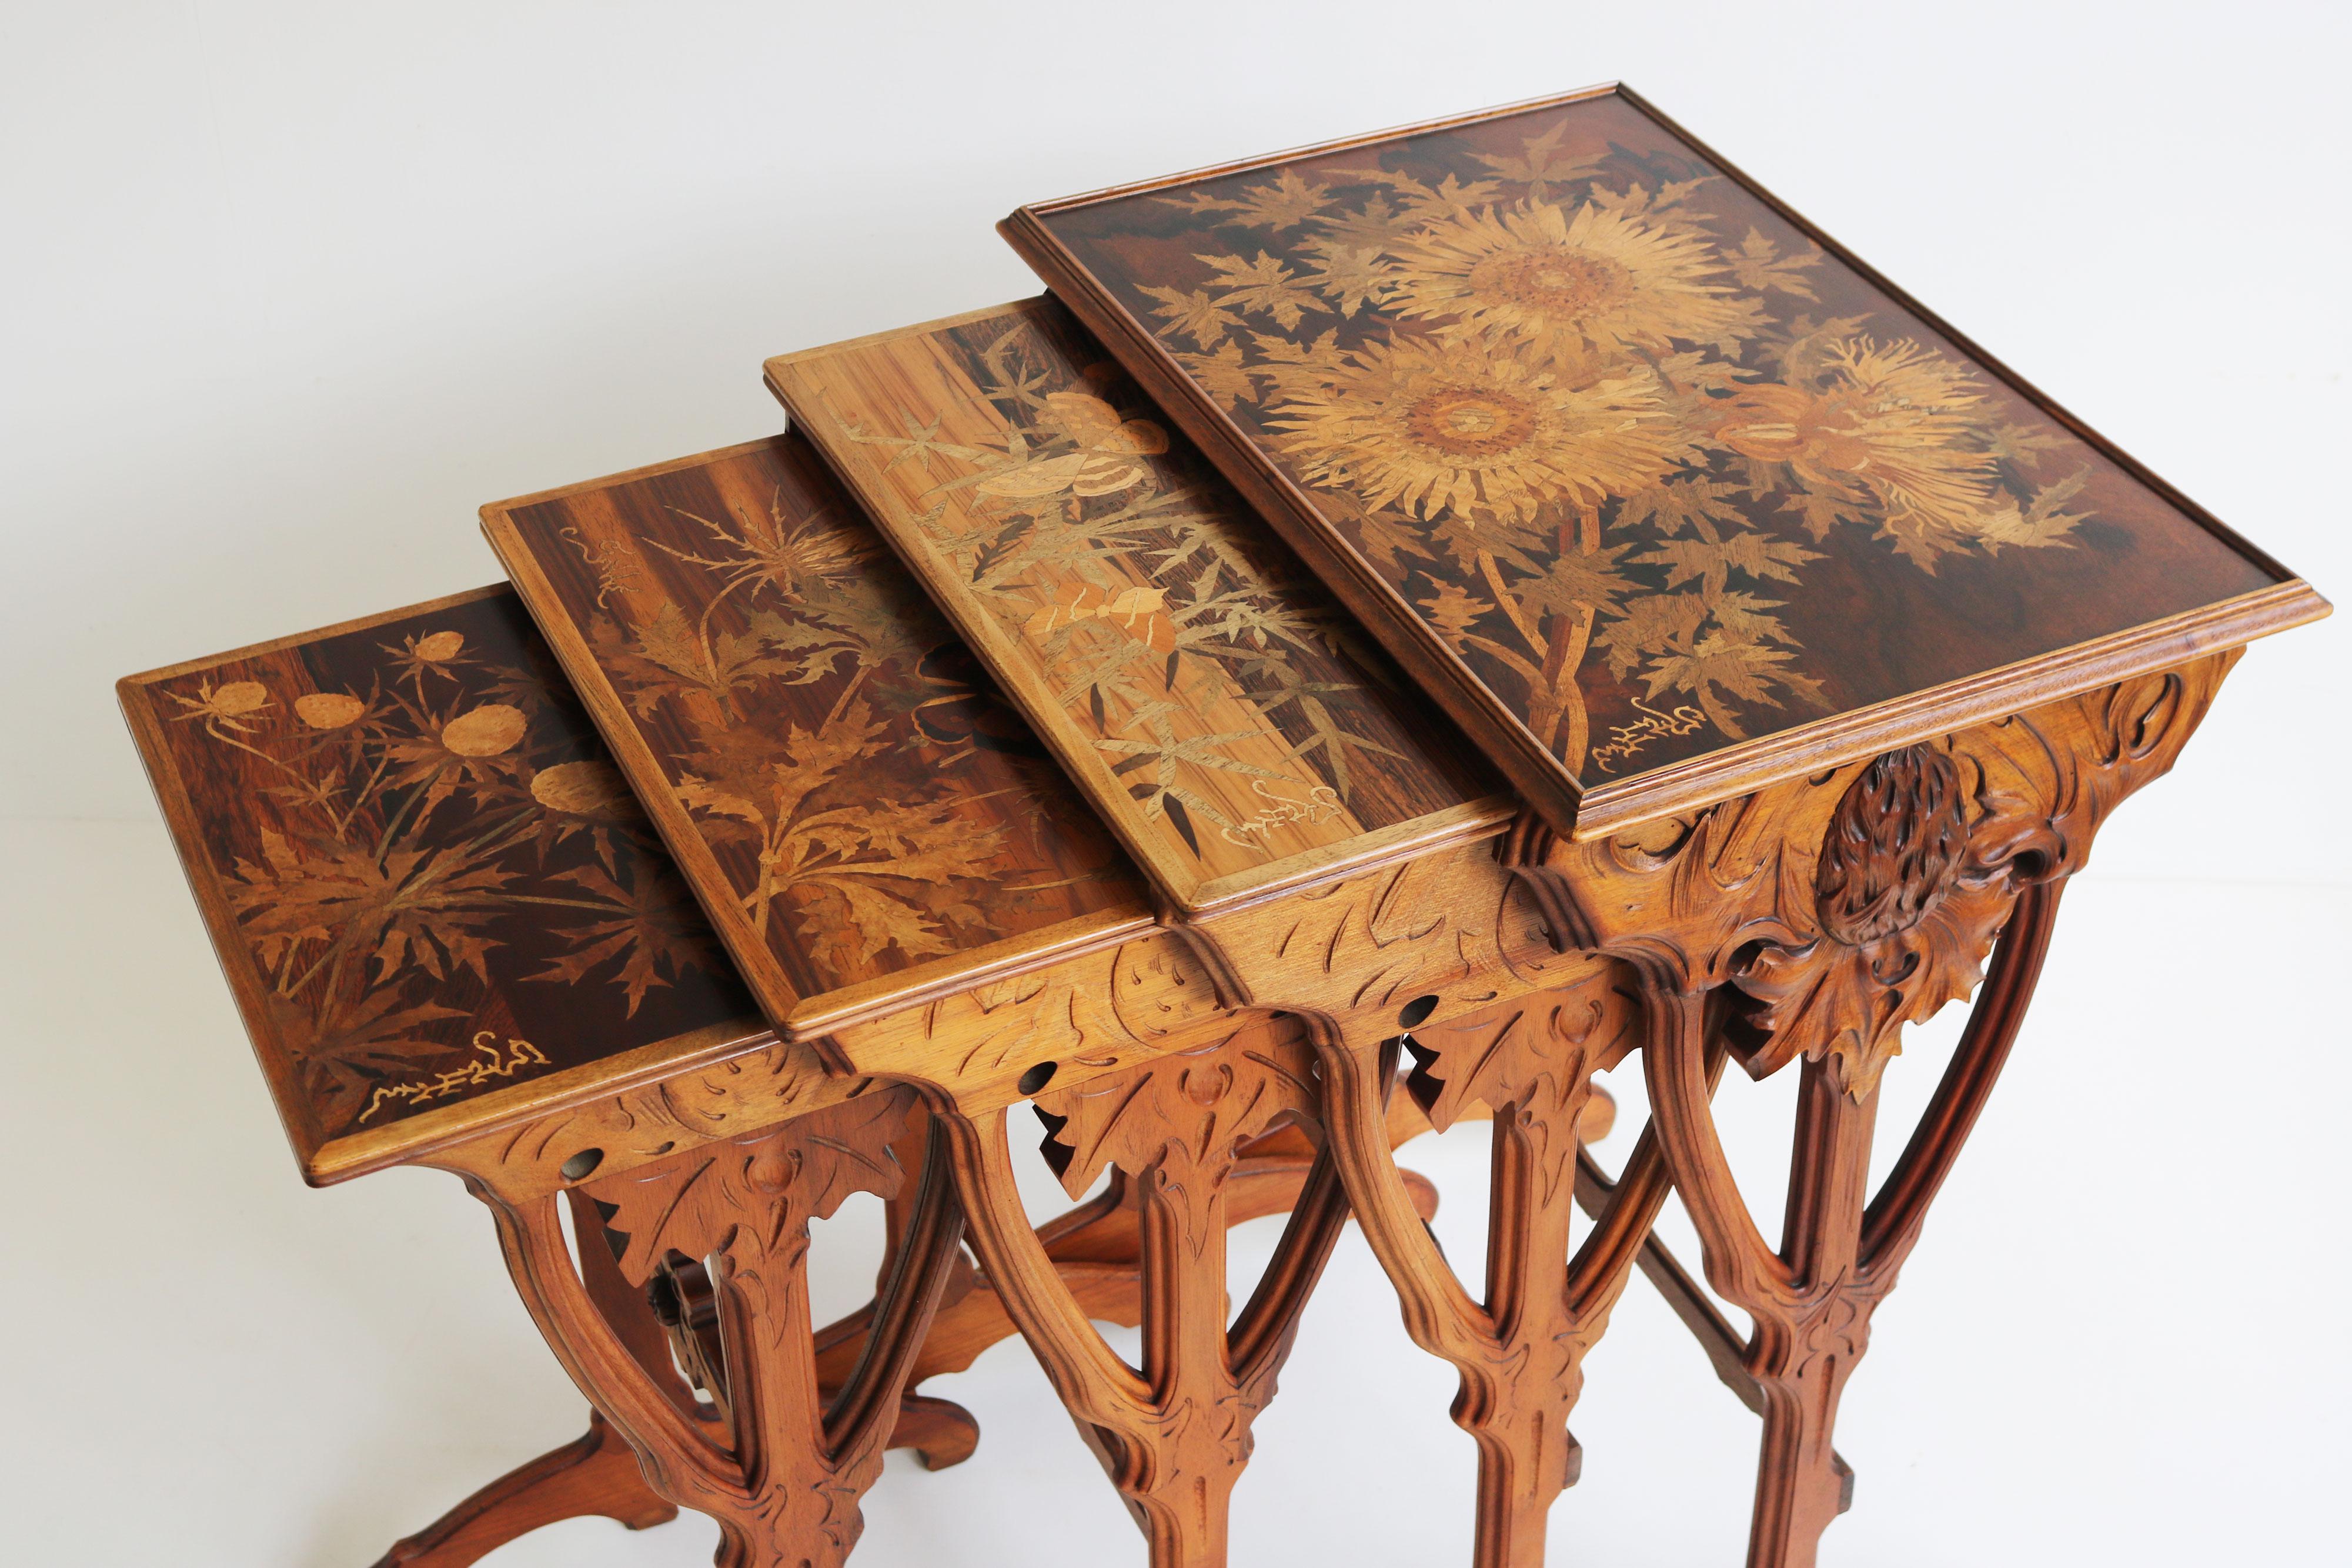 A set of four French Art Nouveau nesting tables by Emile Gallé decorated with fruitwood marquetry in a motif of carlile thistle and butterflies. Each table represents a different stage of growth, with the smallest table showing the newly budded